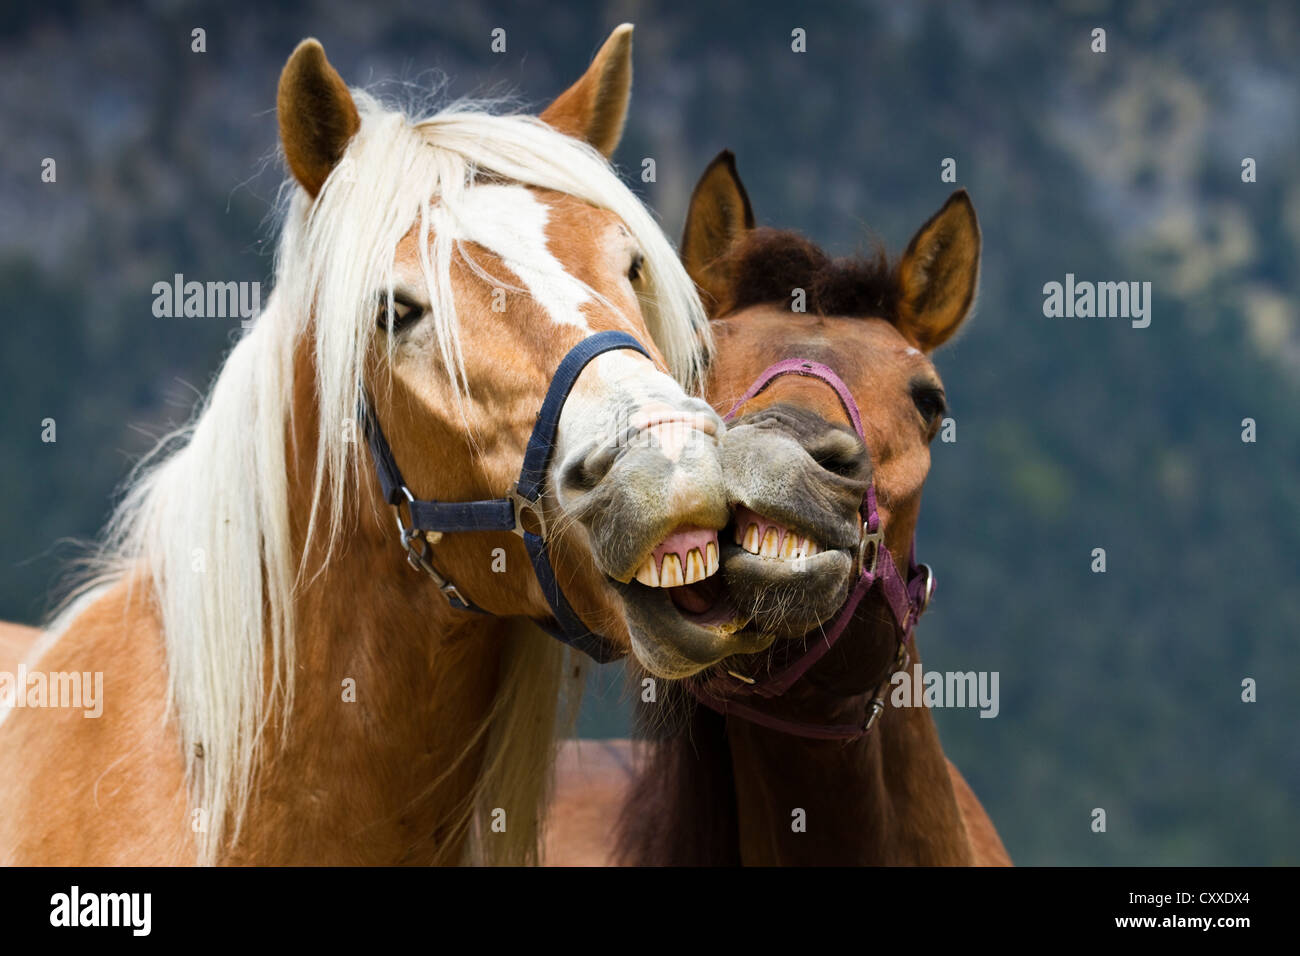 Haflinger and New Forest Pony playing together and biting each other's mouth, gelding, buckskin and brown, North Tyrol, Austria Stock Photo